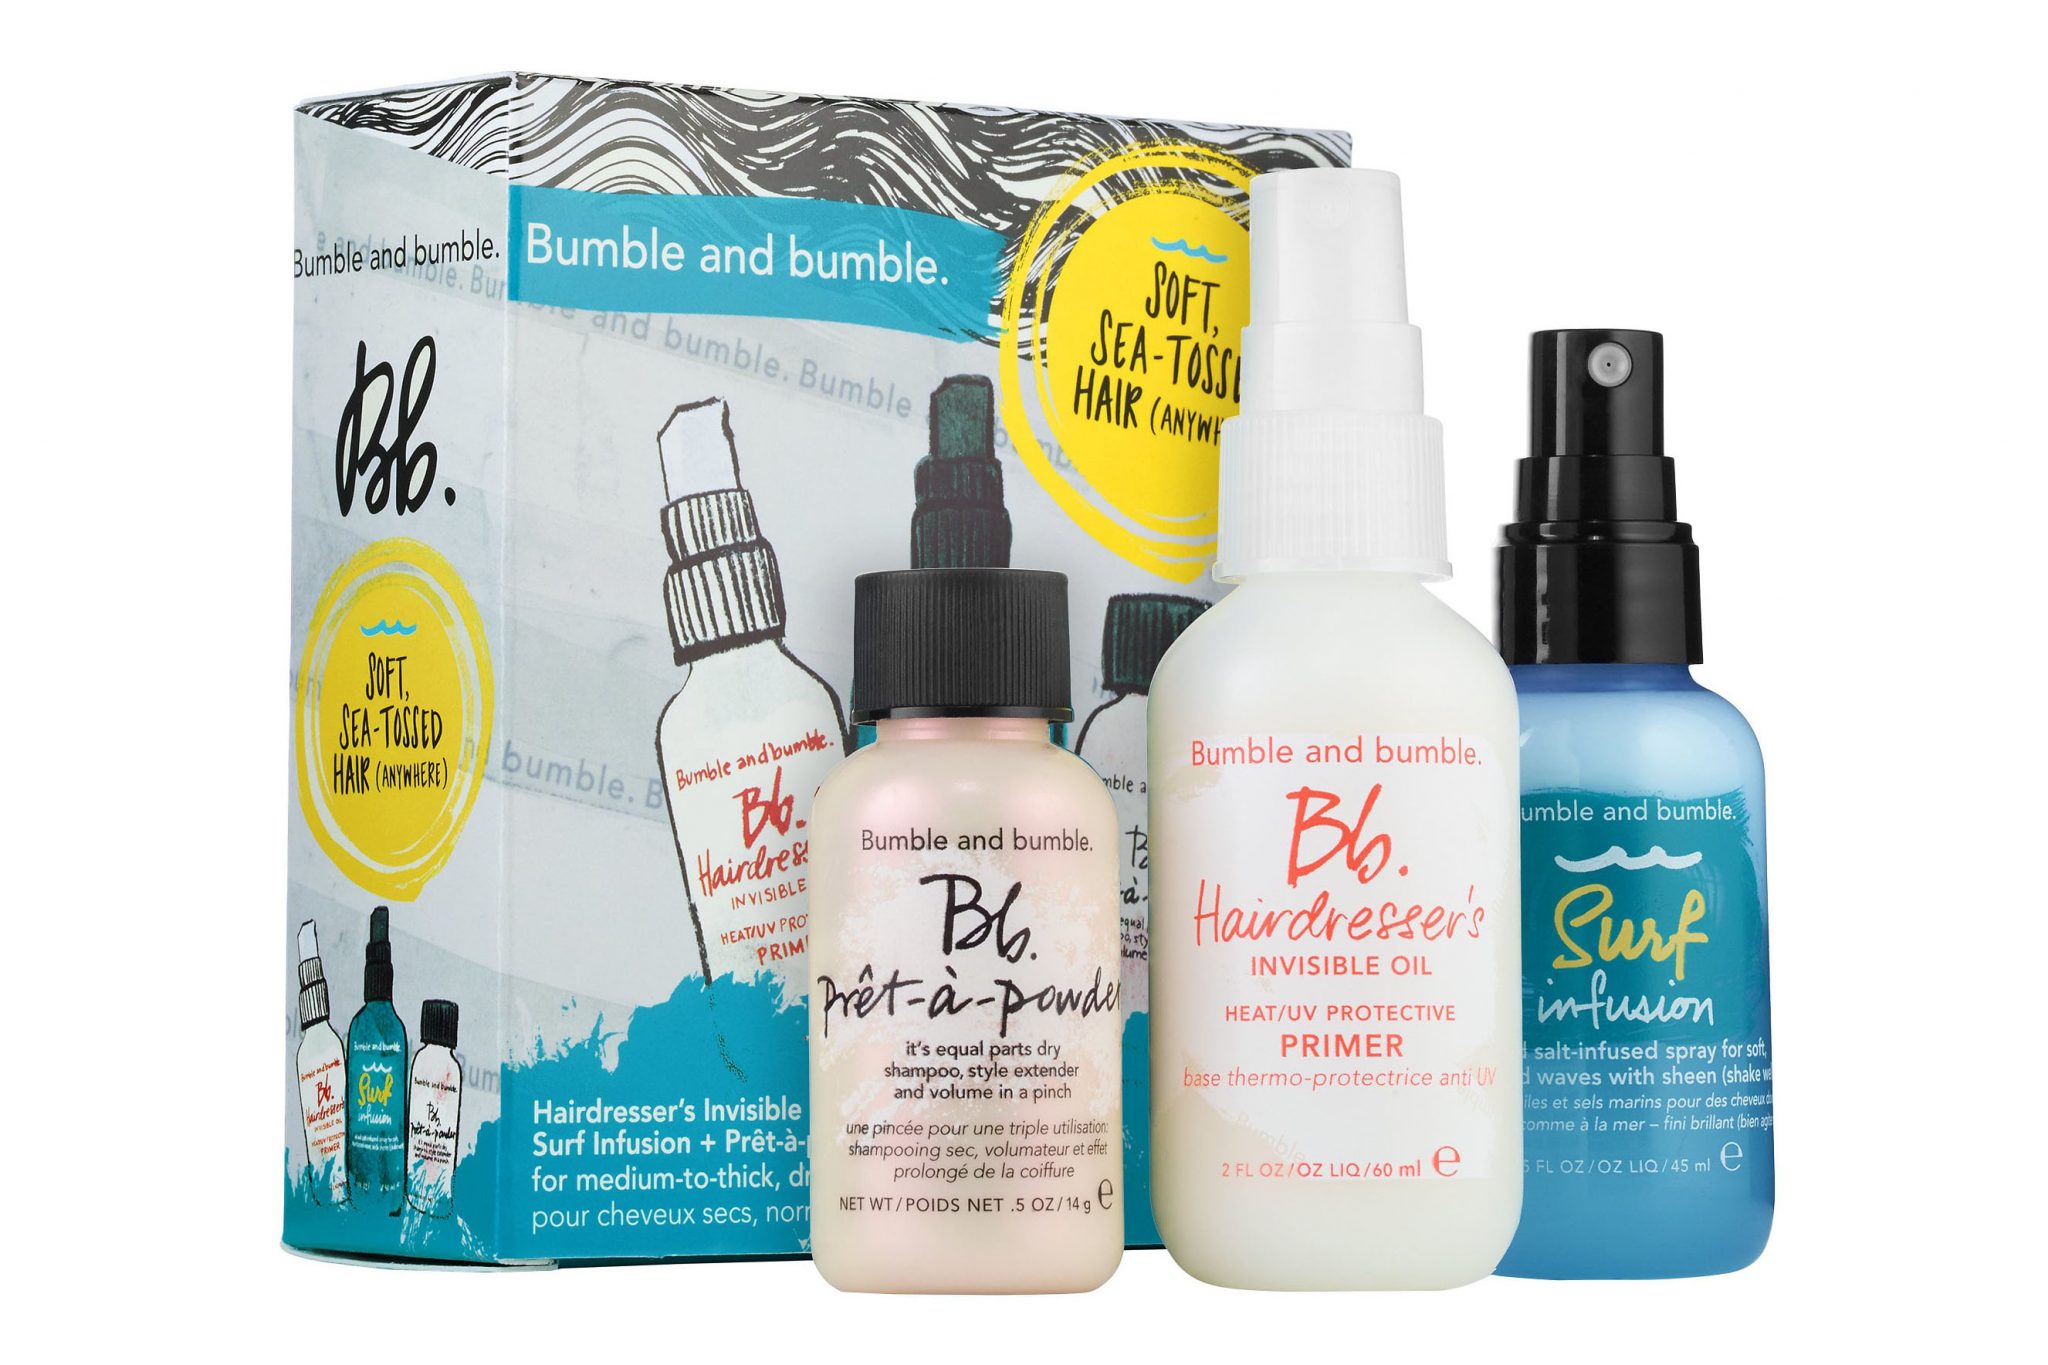 Bumble and Bumble products